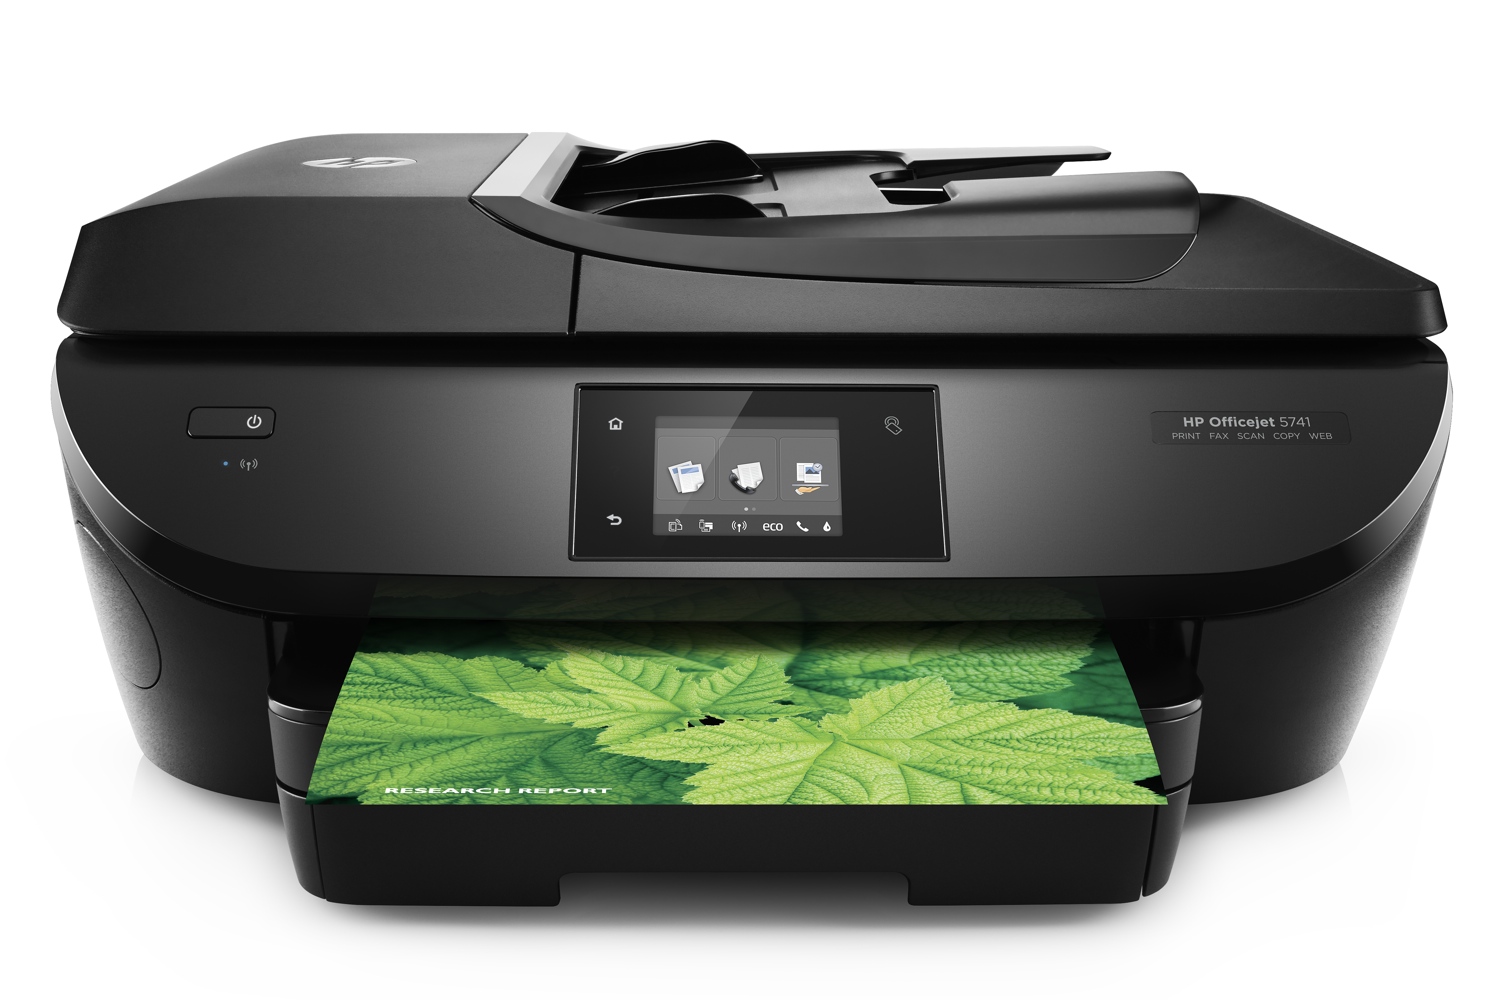 hp puts spotlight on instant ink refill program with new inkjet printers officejet 5741 product